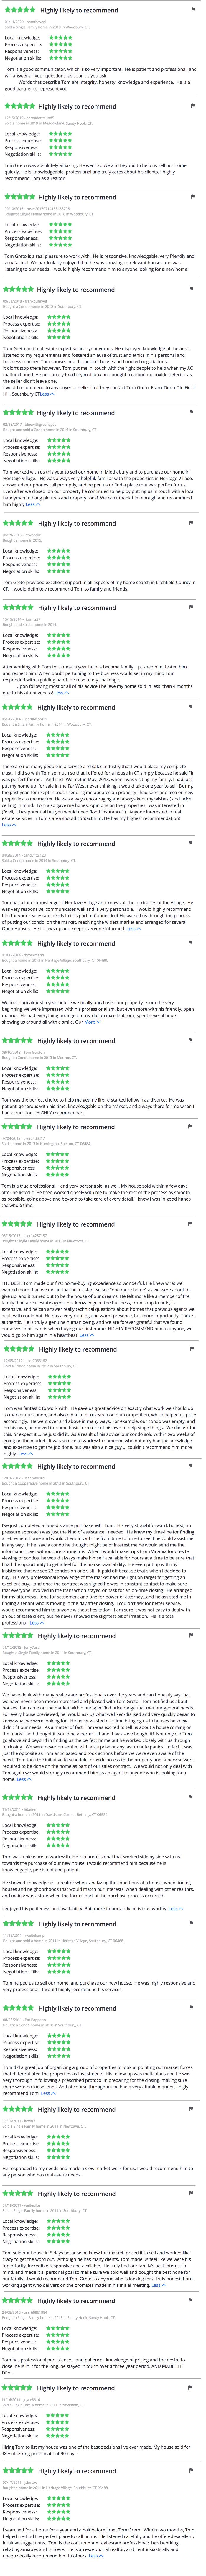 ZillowReviews